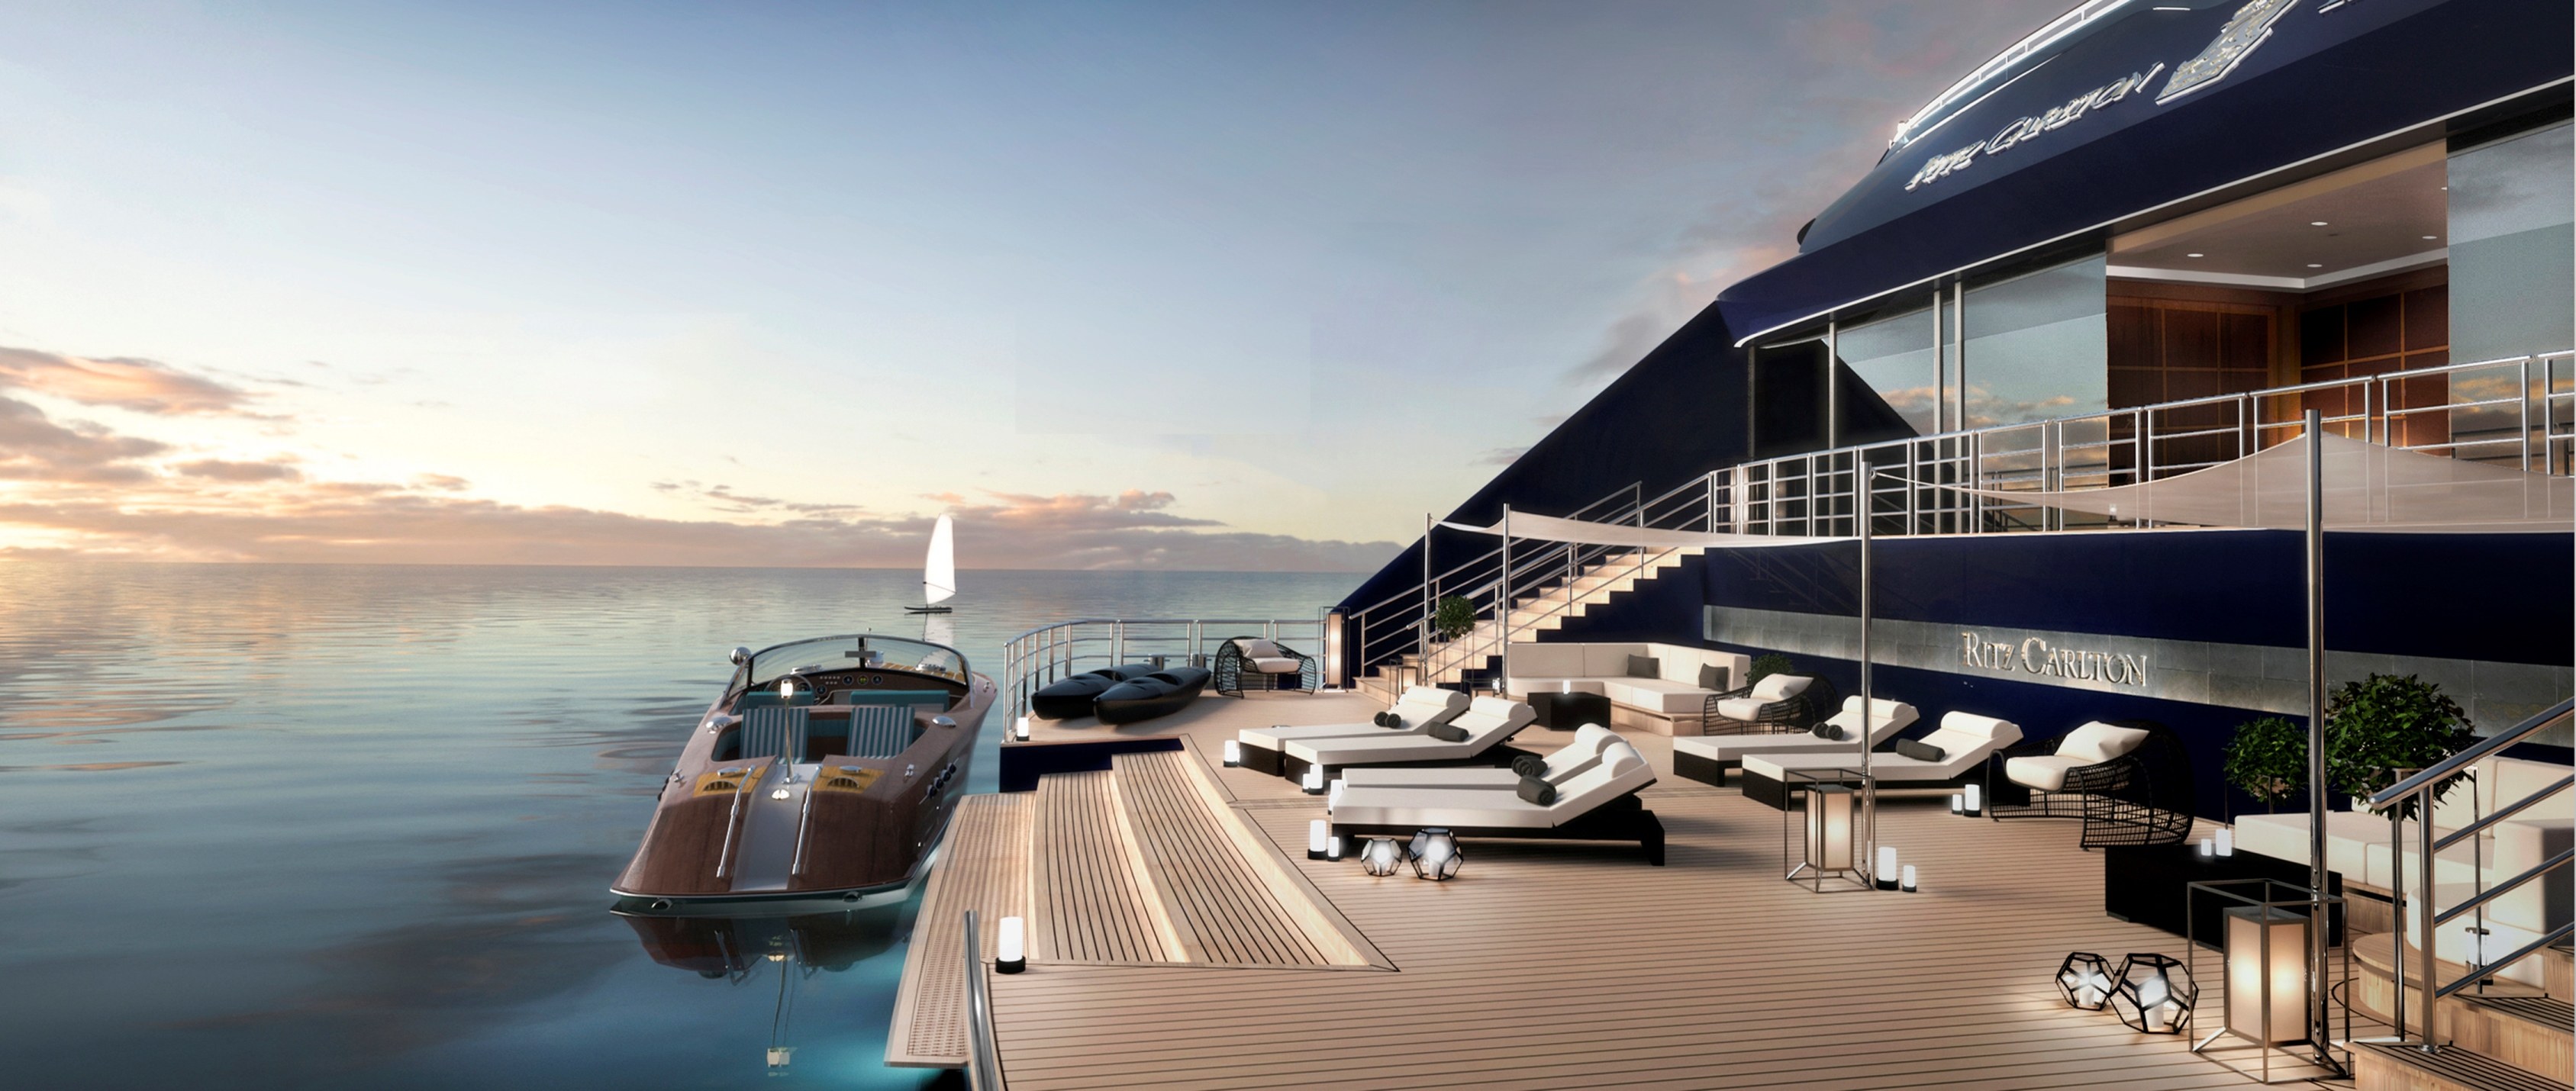 The Ritz-Carlton Yacht Collection is set to unveil its luxury experiences at sea. Photo: Handout